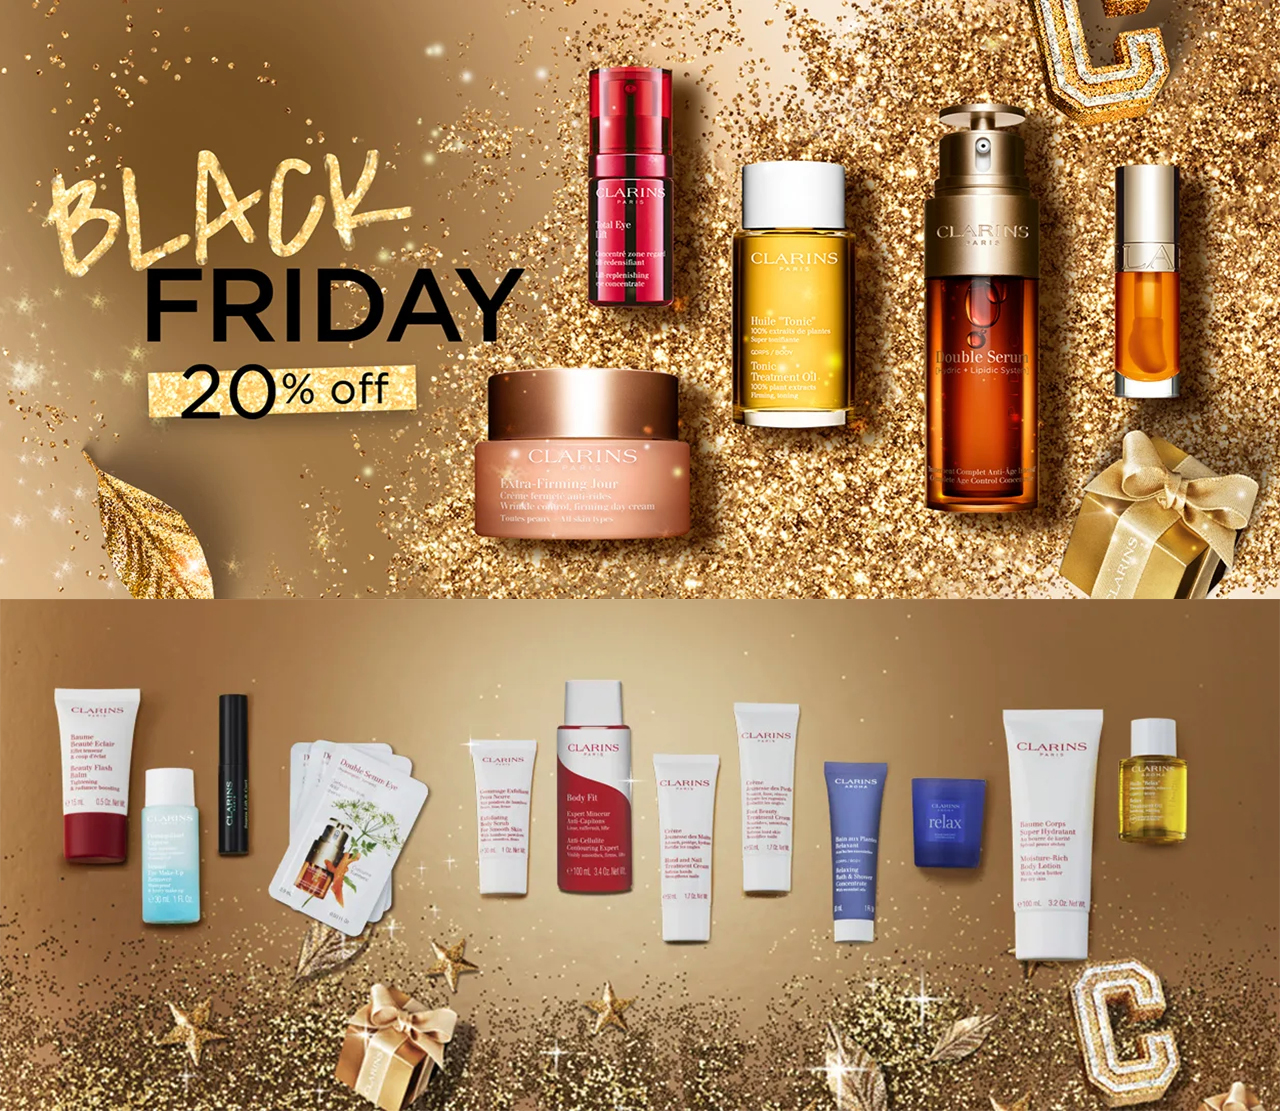 Black Friday at Clarins: 20% off sitewide + up to 3 gifts (worth up to £117)